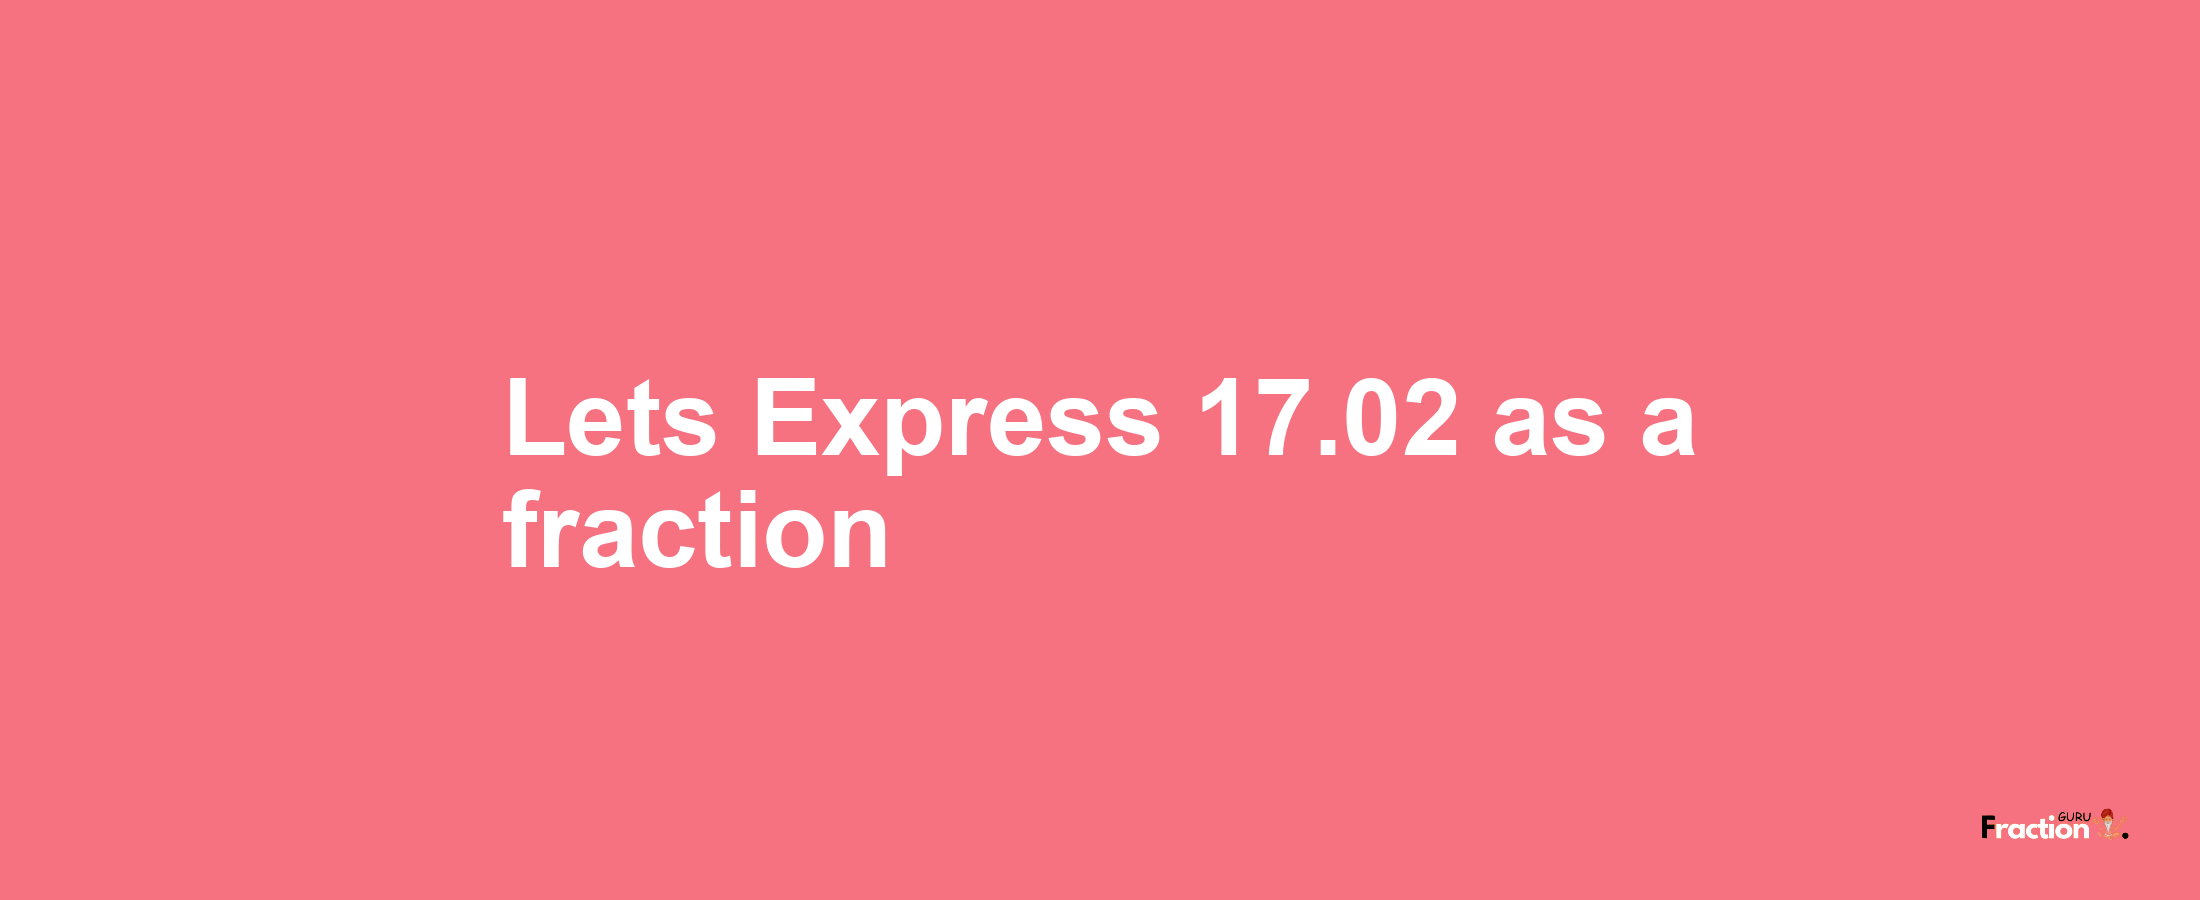 Lets Express 17.02 as afraction